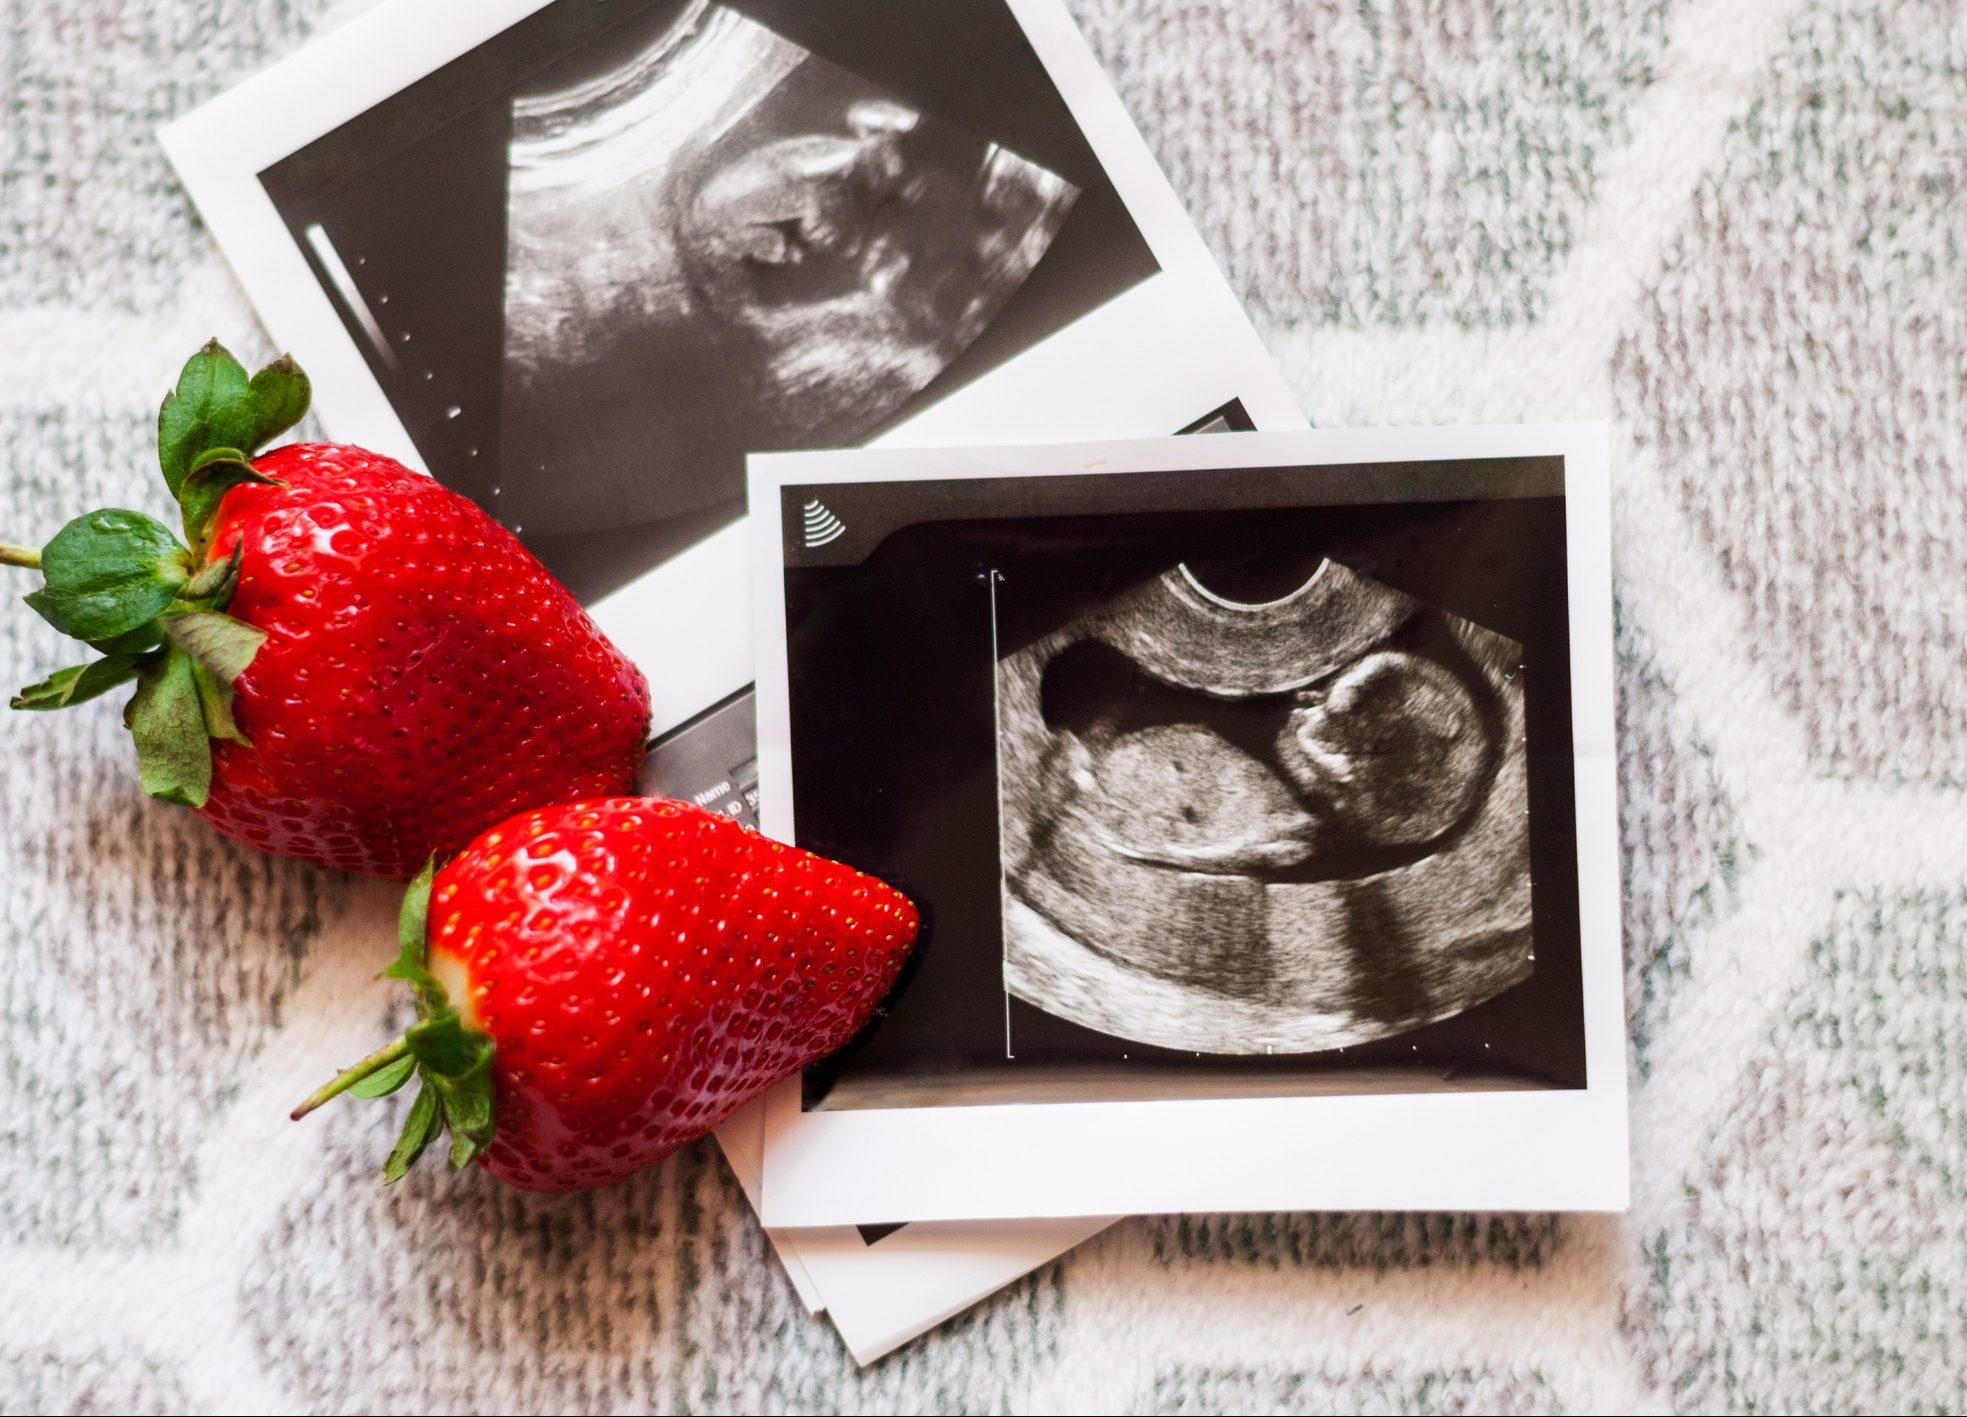 FUNIBER-two-strawberry-and-a-photo-of-a-human-fetus-from-an-ultrasound-scan-during-pregnancy-on-a-gray-background